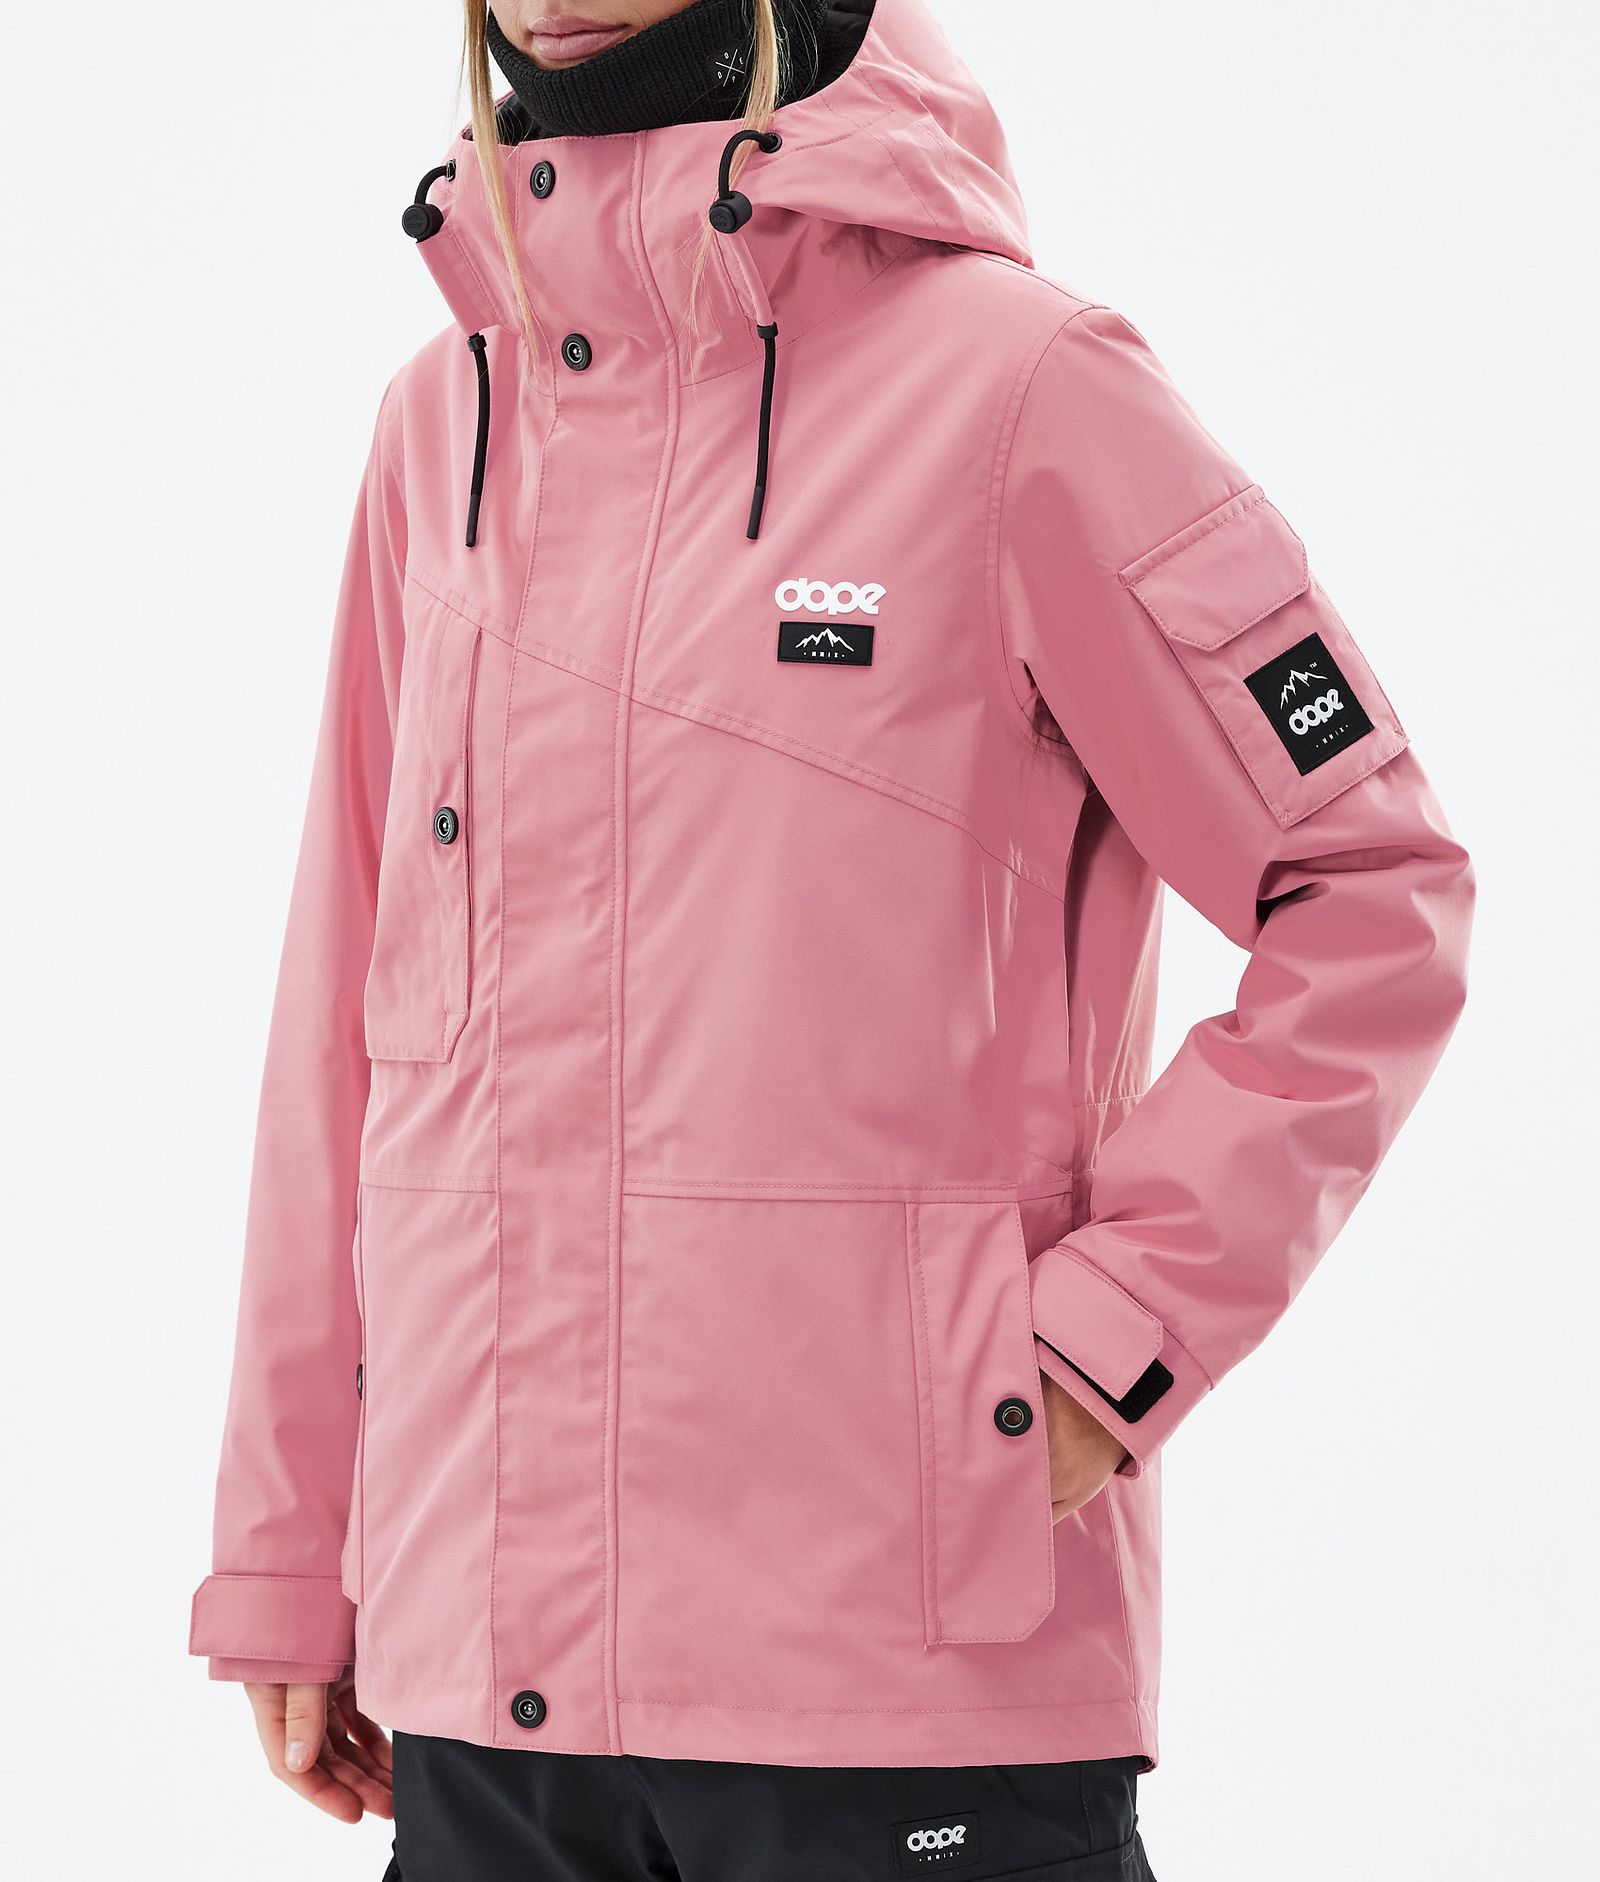 Dope Adept W Giacca Sci Donna Pink/Black